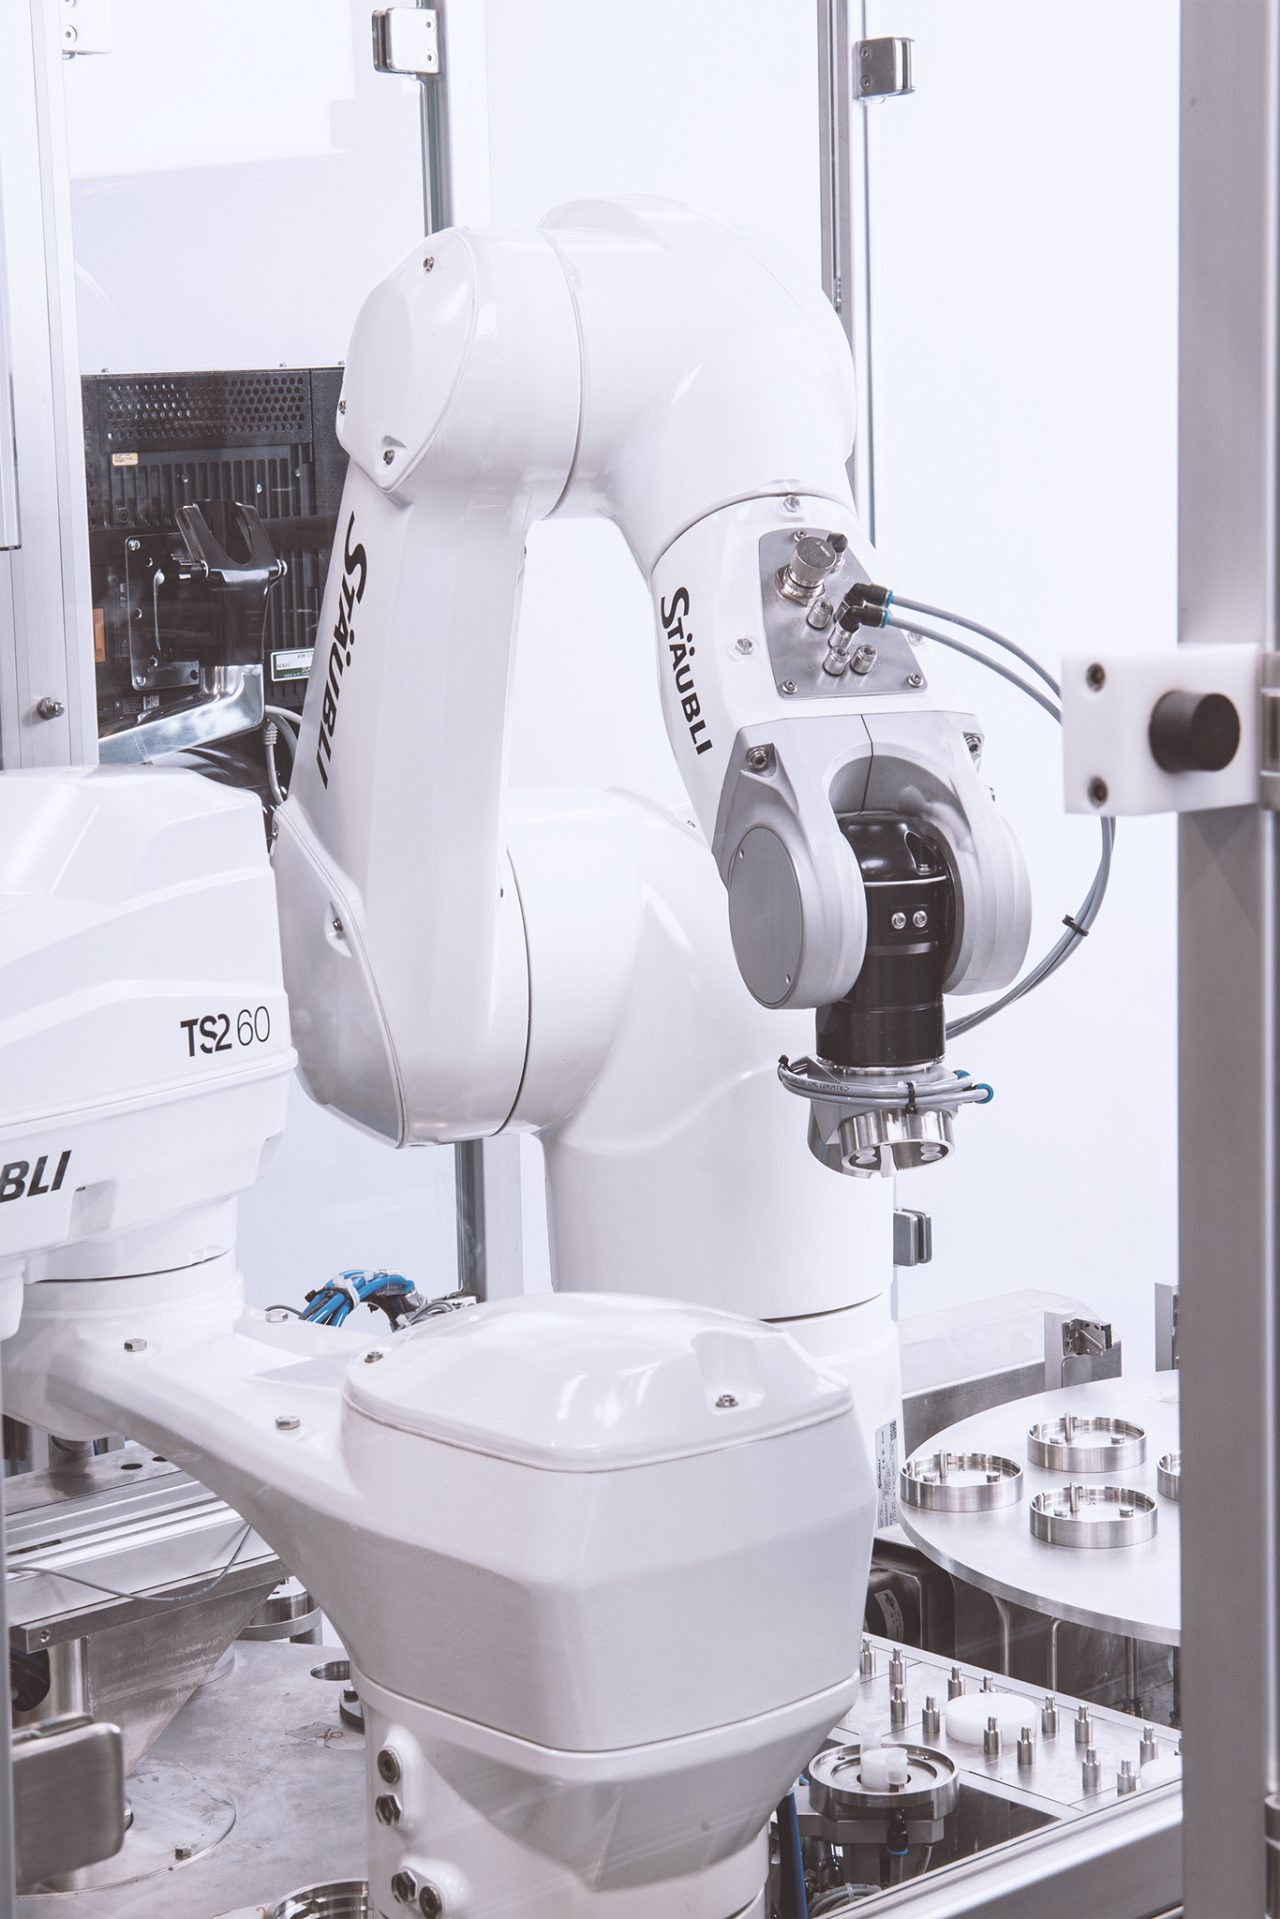 The two Stäubli robots impress in this application with their superior hygienic design.